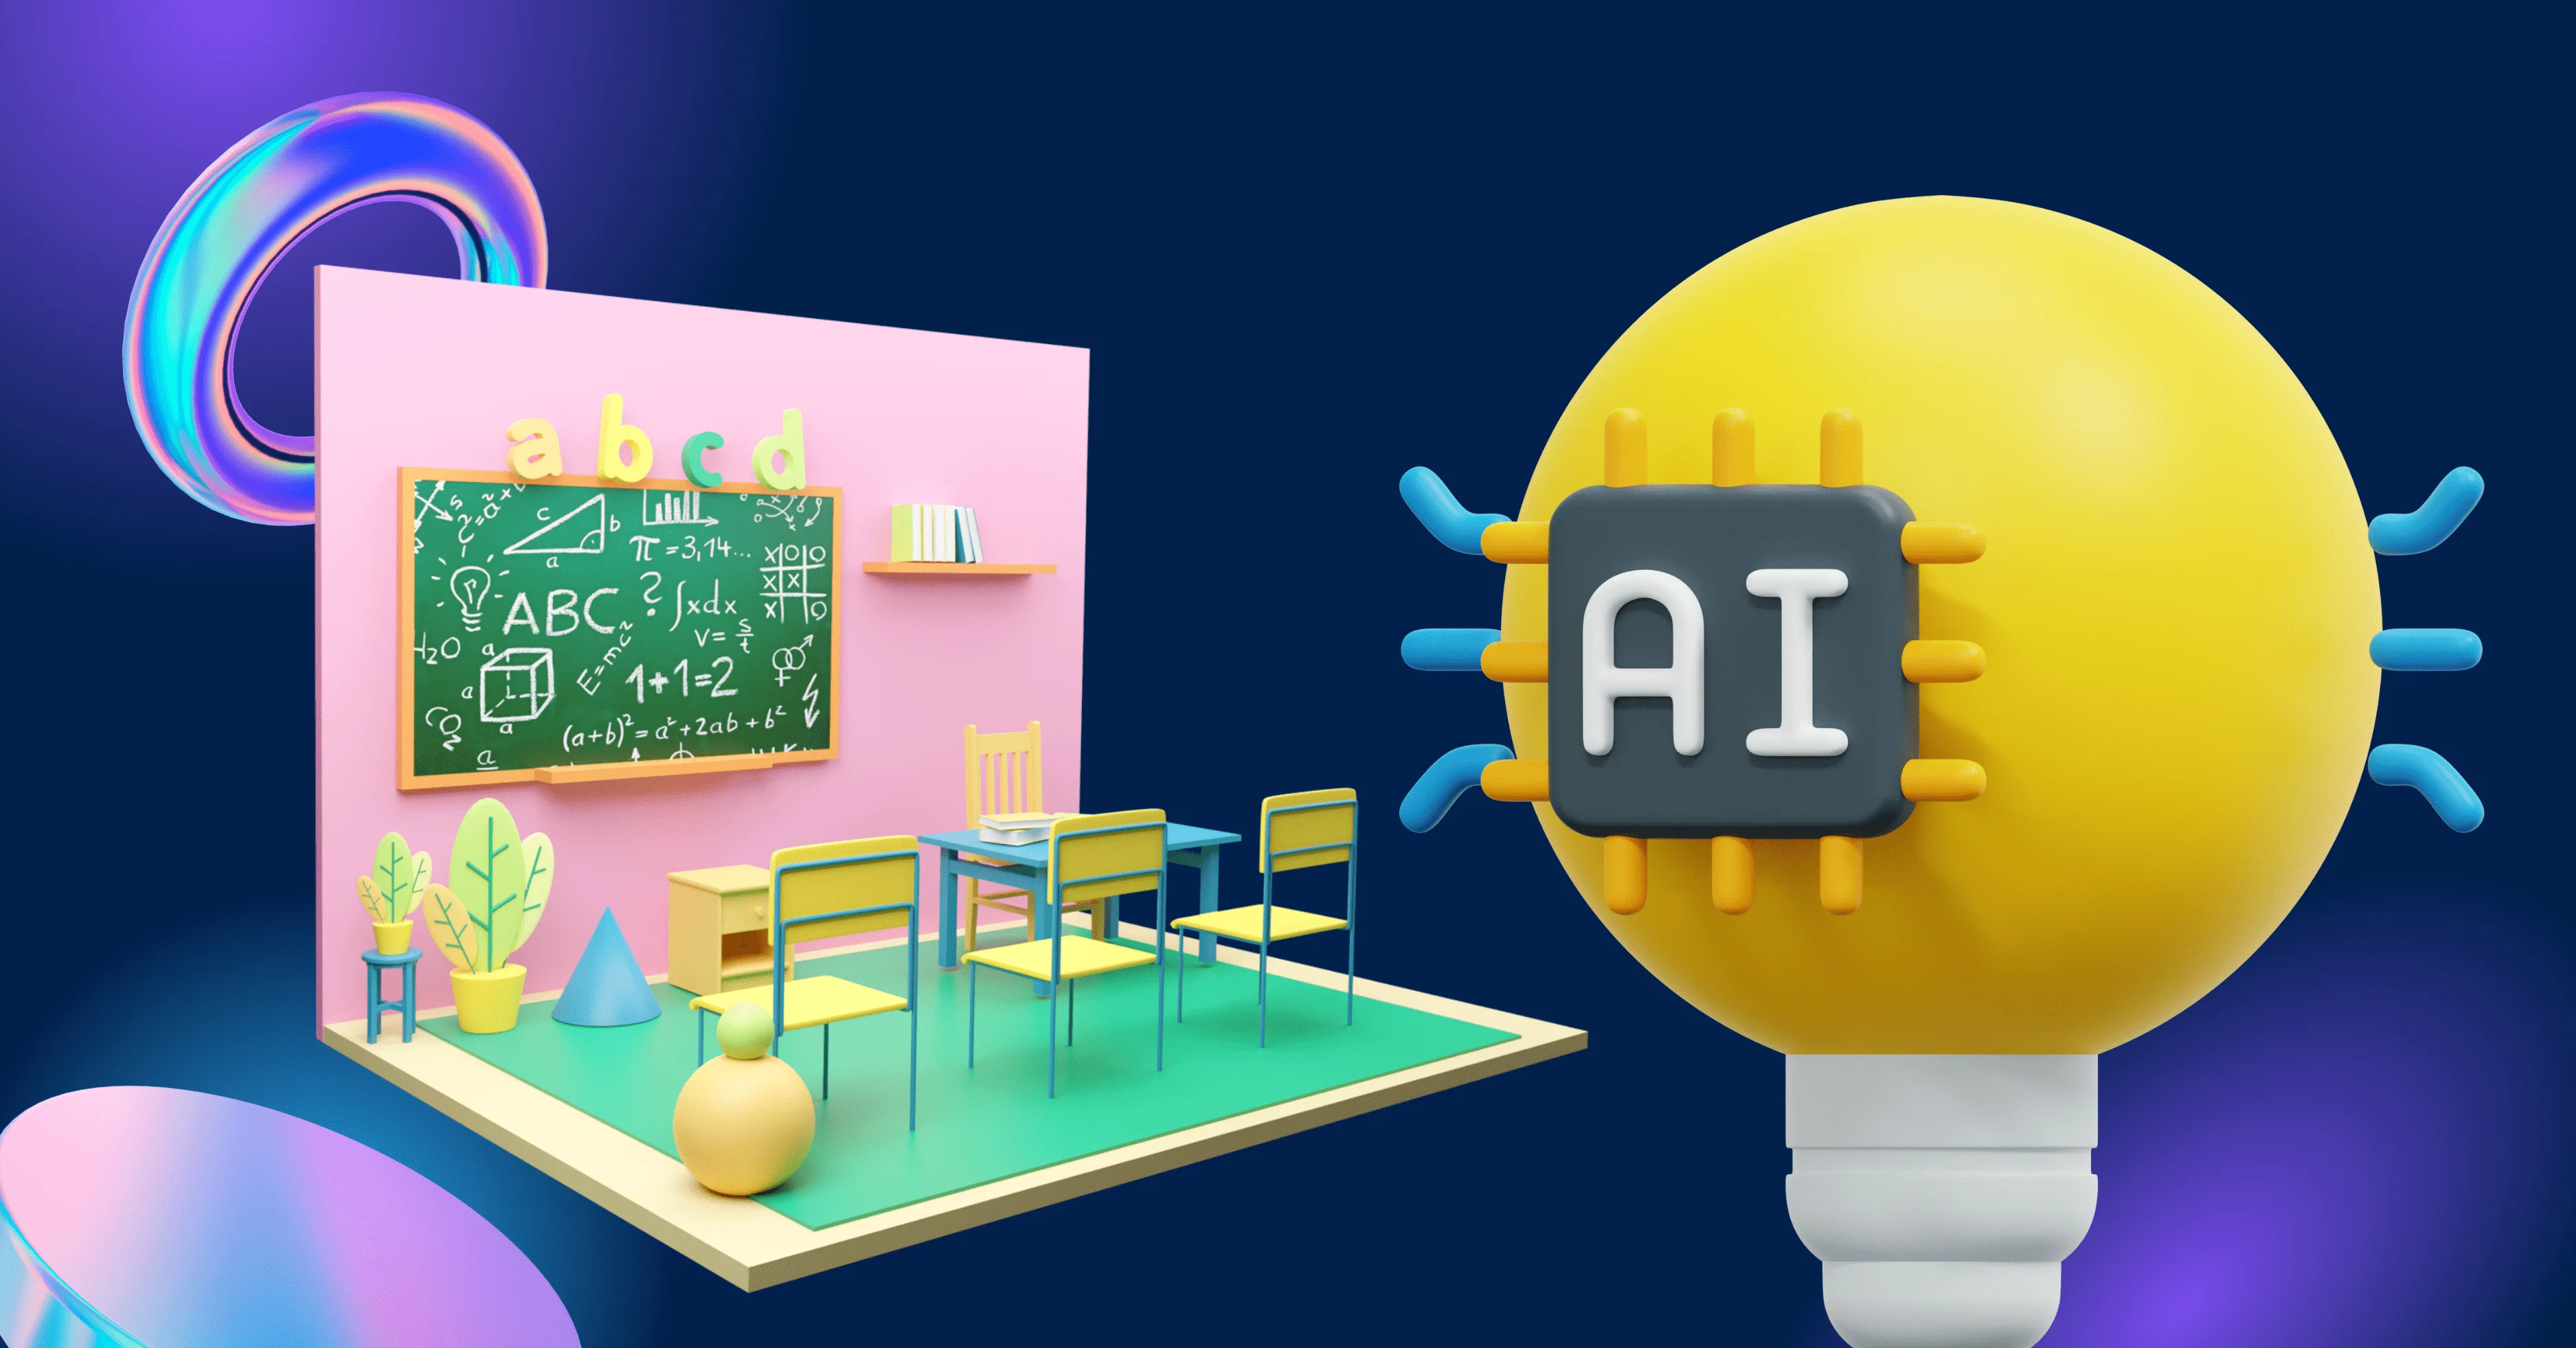 Stylized classroom setting with a blackboard displaying alphabets and simple math, contrasted with a large symbolic representation of AI (Artificial Intelligence), suggesting the integration of AI technology in education.